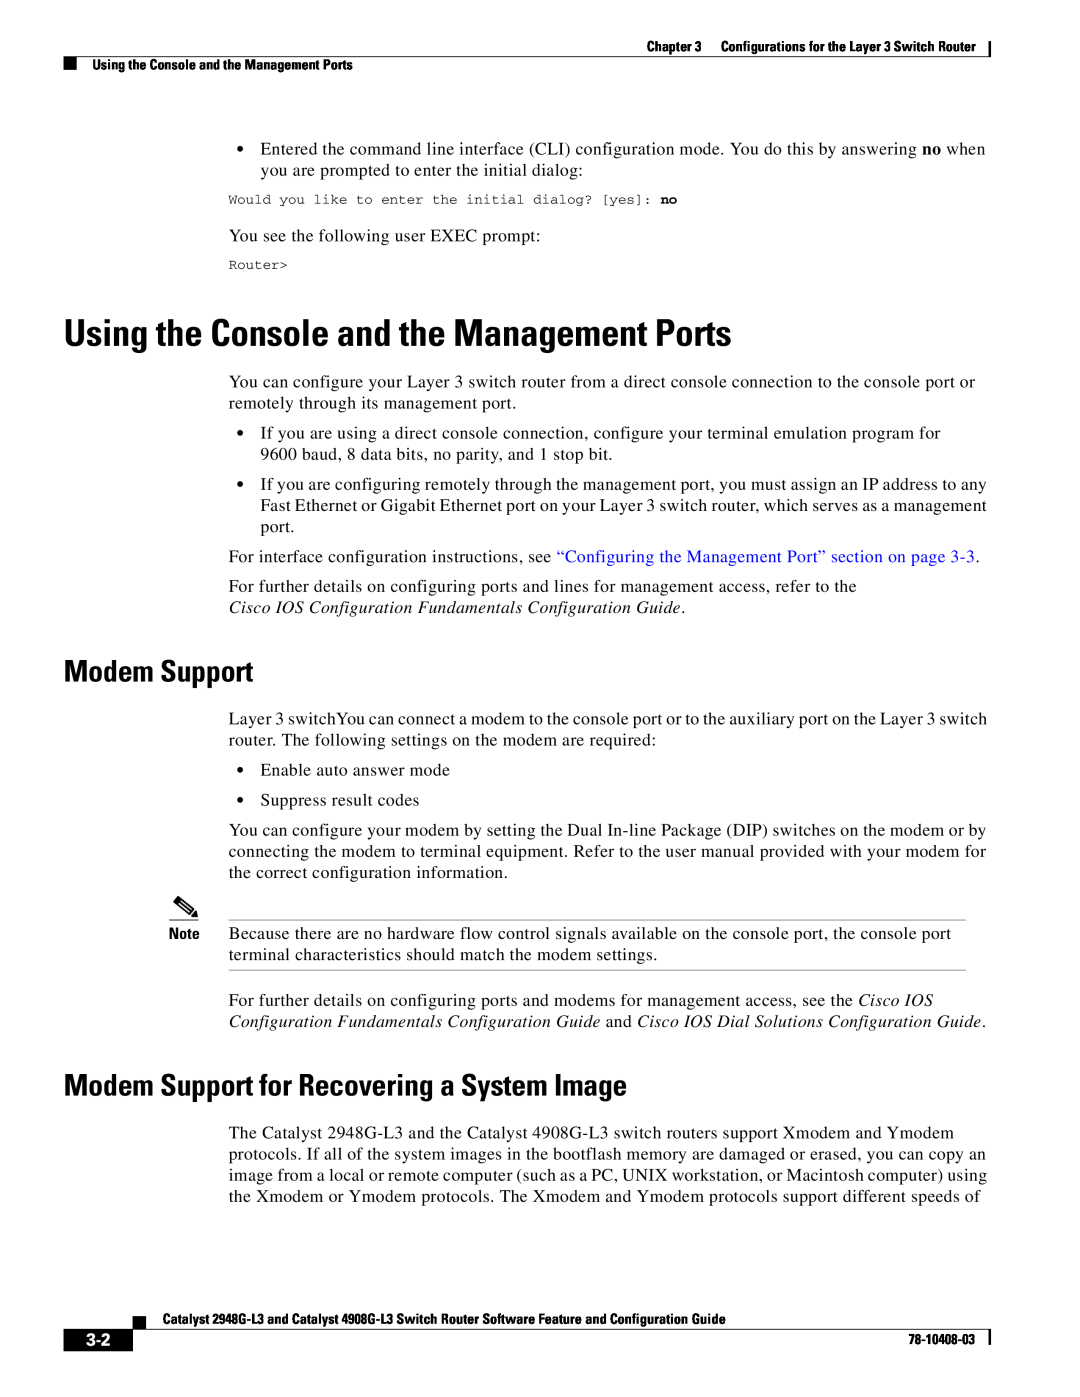 Cisco Systems 4908G-L3, 2948G-L3 manual Using the Console and the Management Ports, Modem Support 